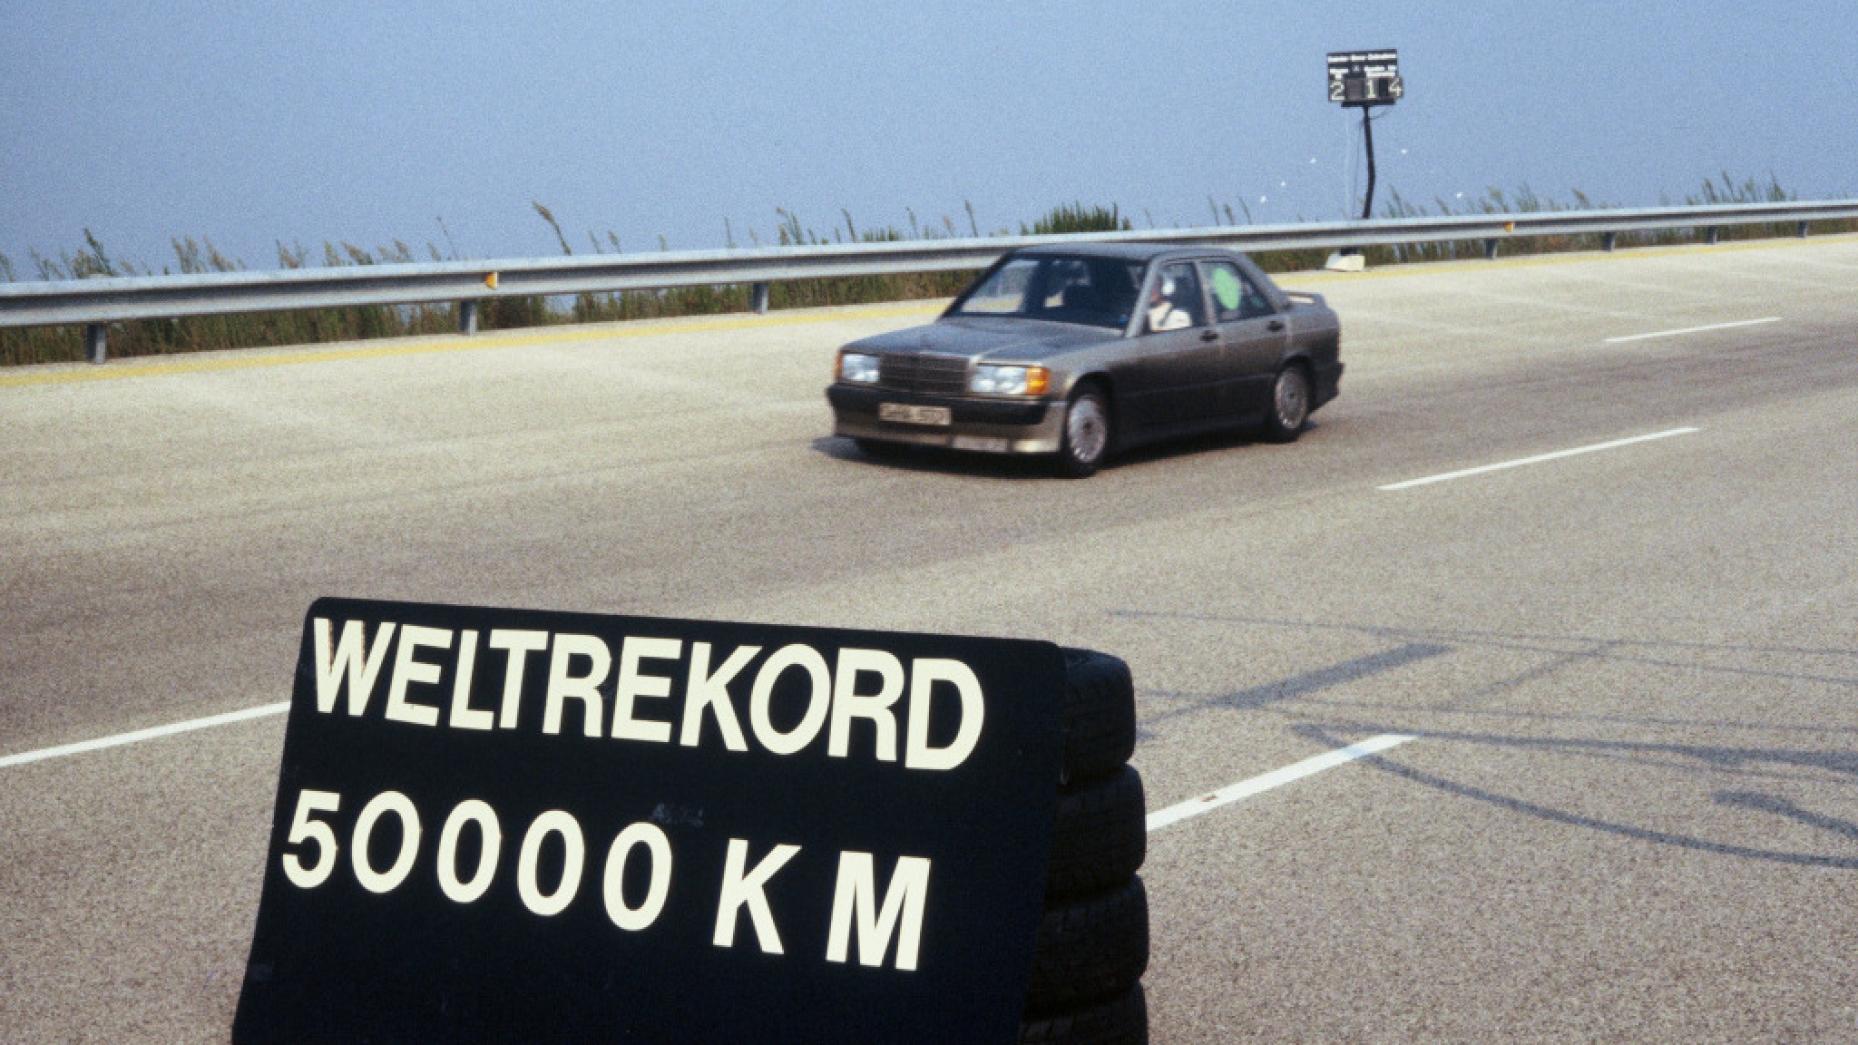 8. Yeah, the Senna race was cool. But 50,000km in 200 hours is perhaps even cooler 